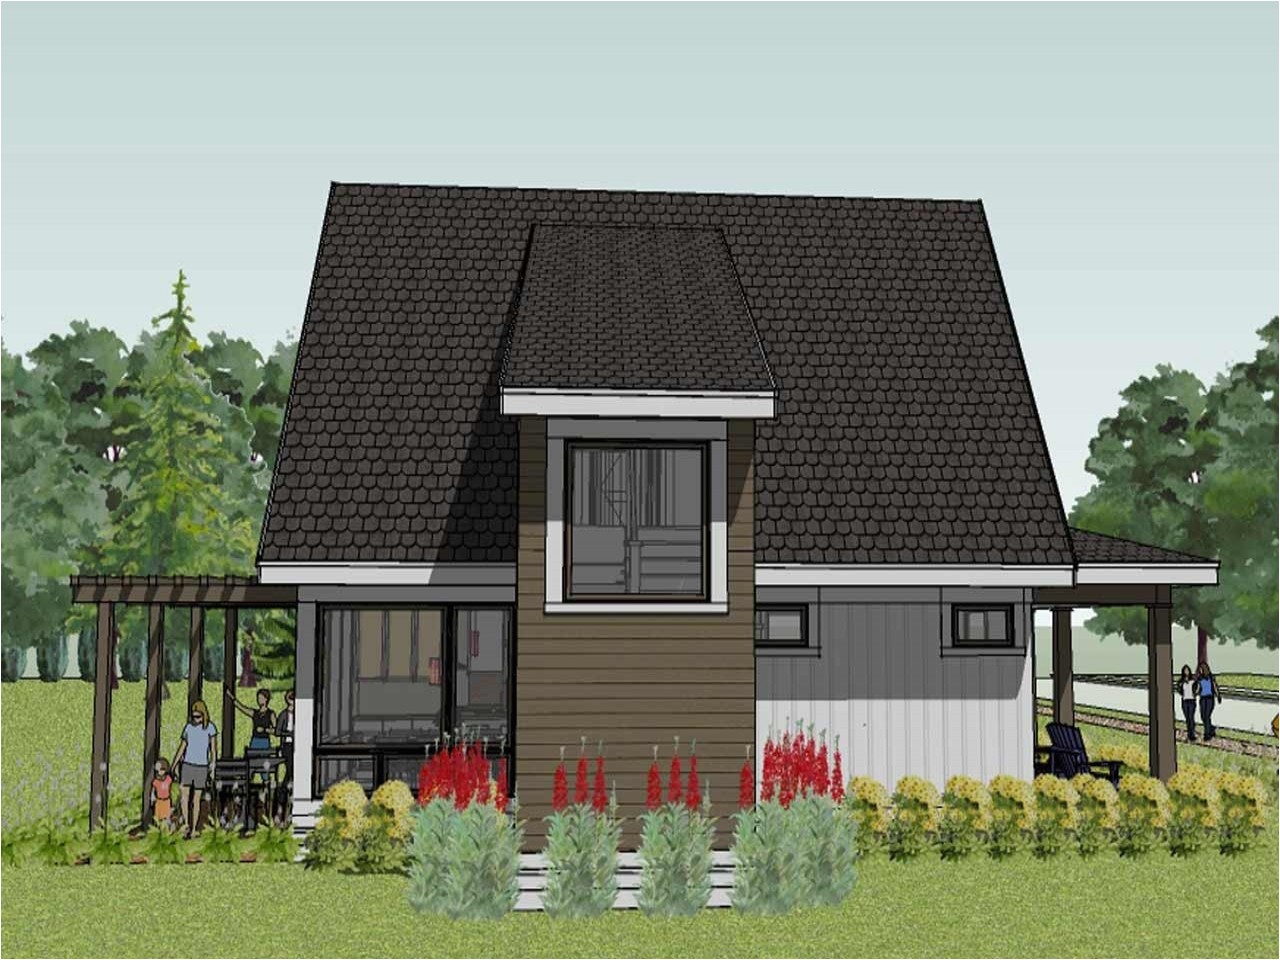 9936fe843c8ae707 bungalow house plans simple small house floor plans